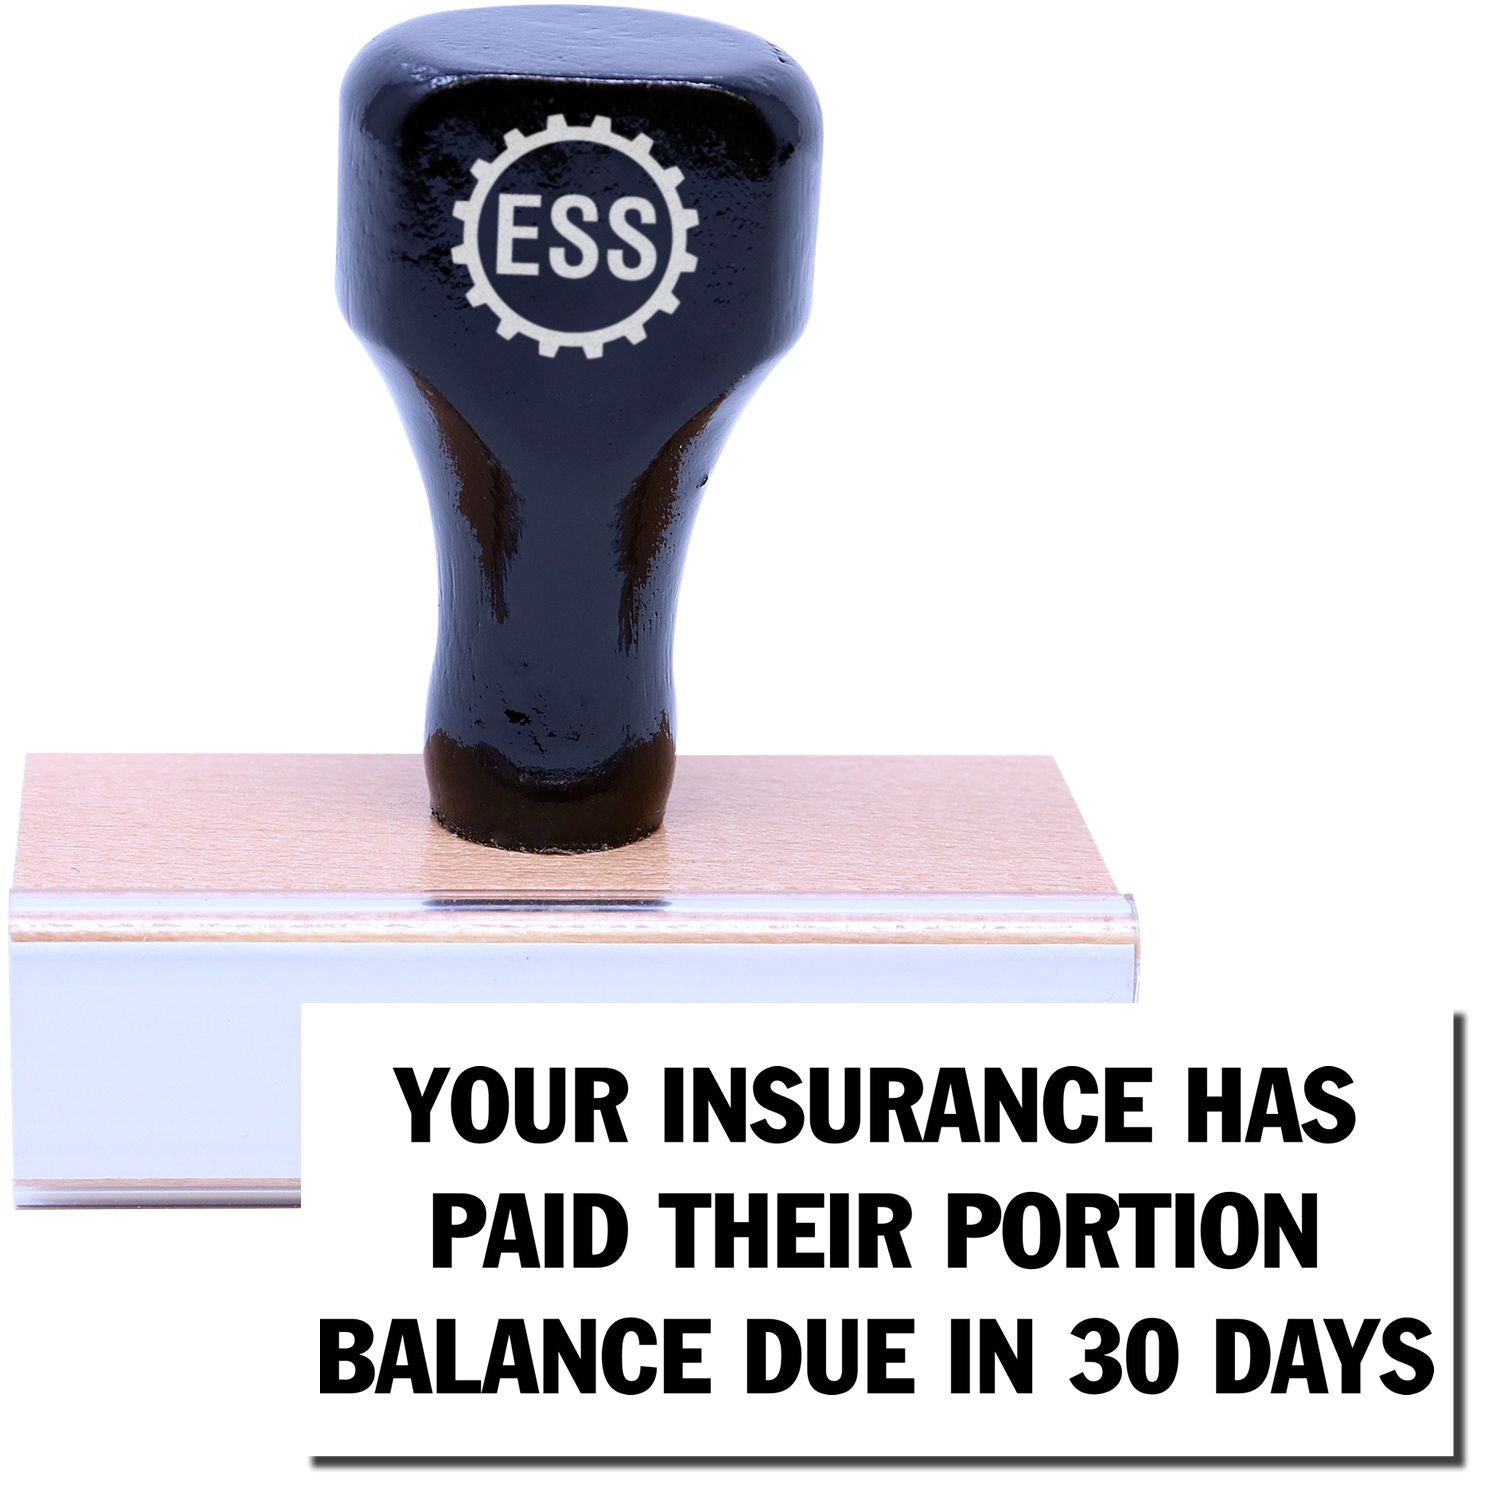 A stock office rubber stamp with a stamped image showing how the texts "YOUR INSURANCE HAS PAID THEIR PORTION" and "BALANCE DUE IN 30 DAYS" are displayed after stamping.